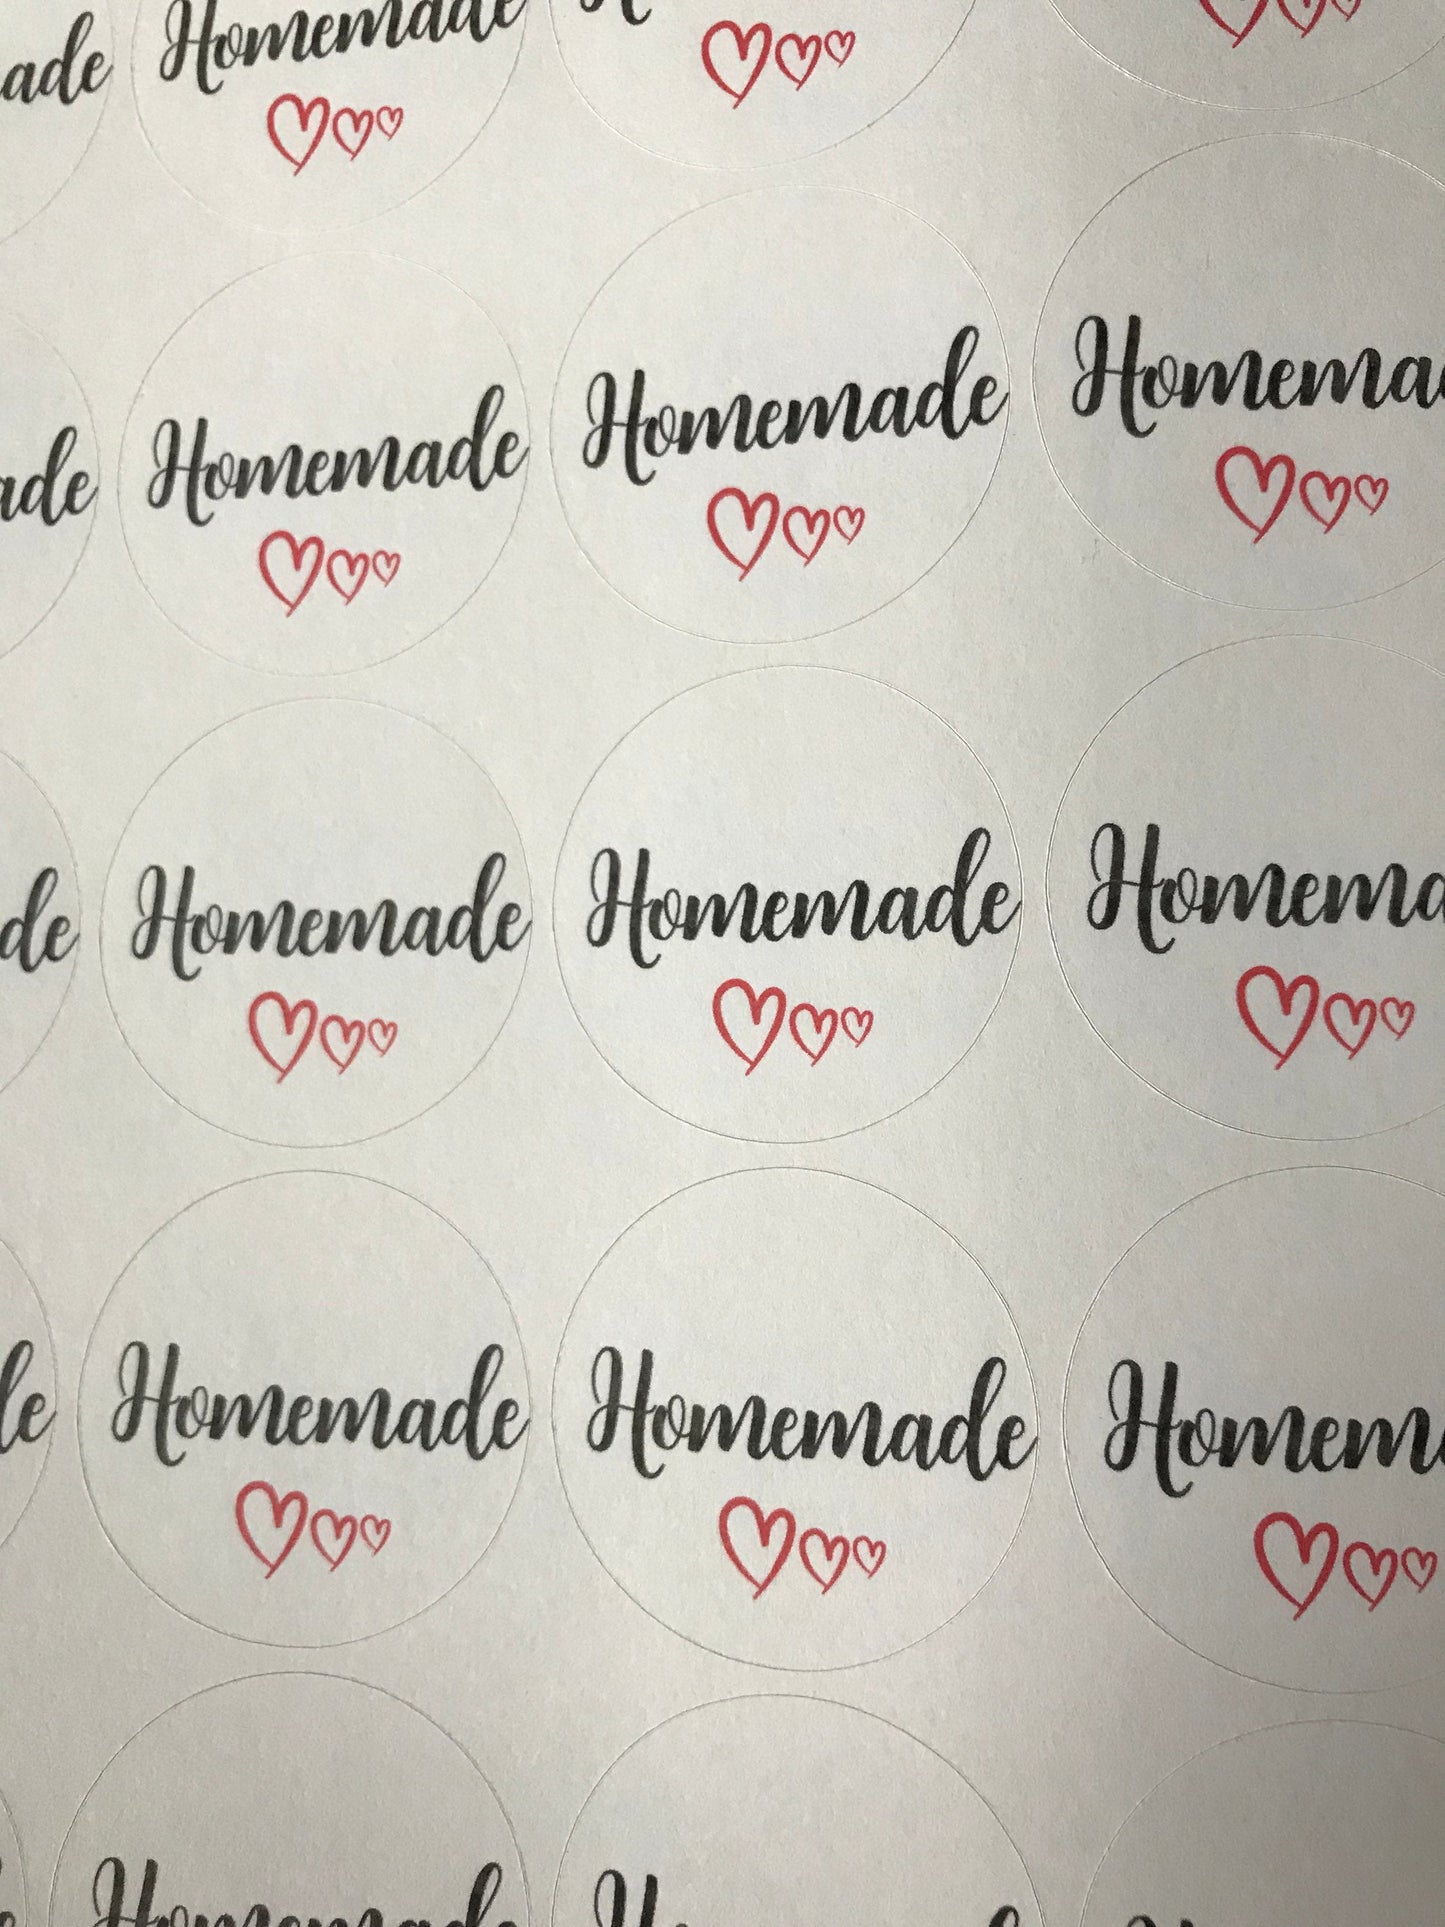 homemade stickers, order stickers, stickers